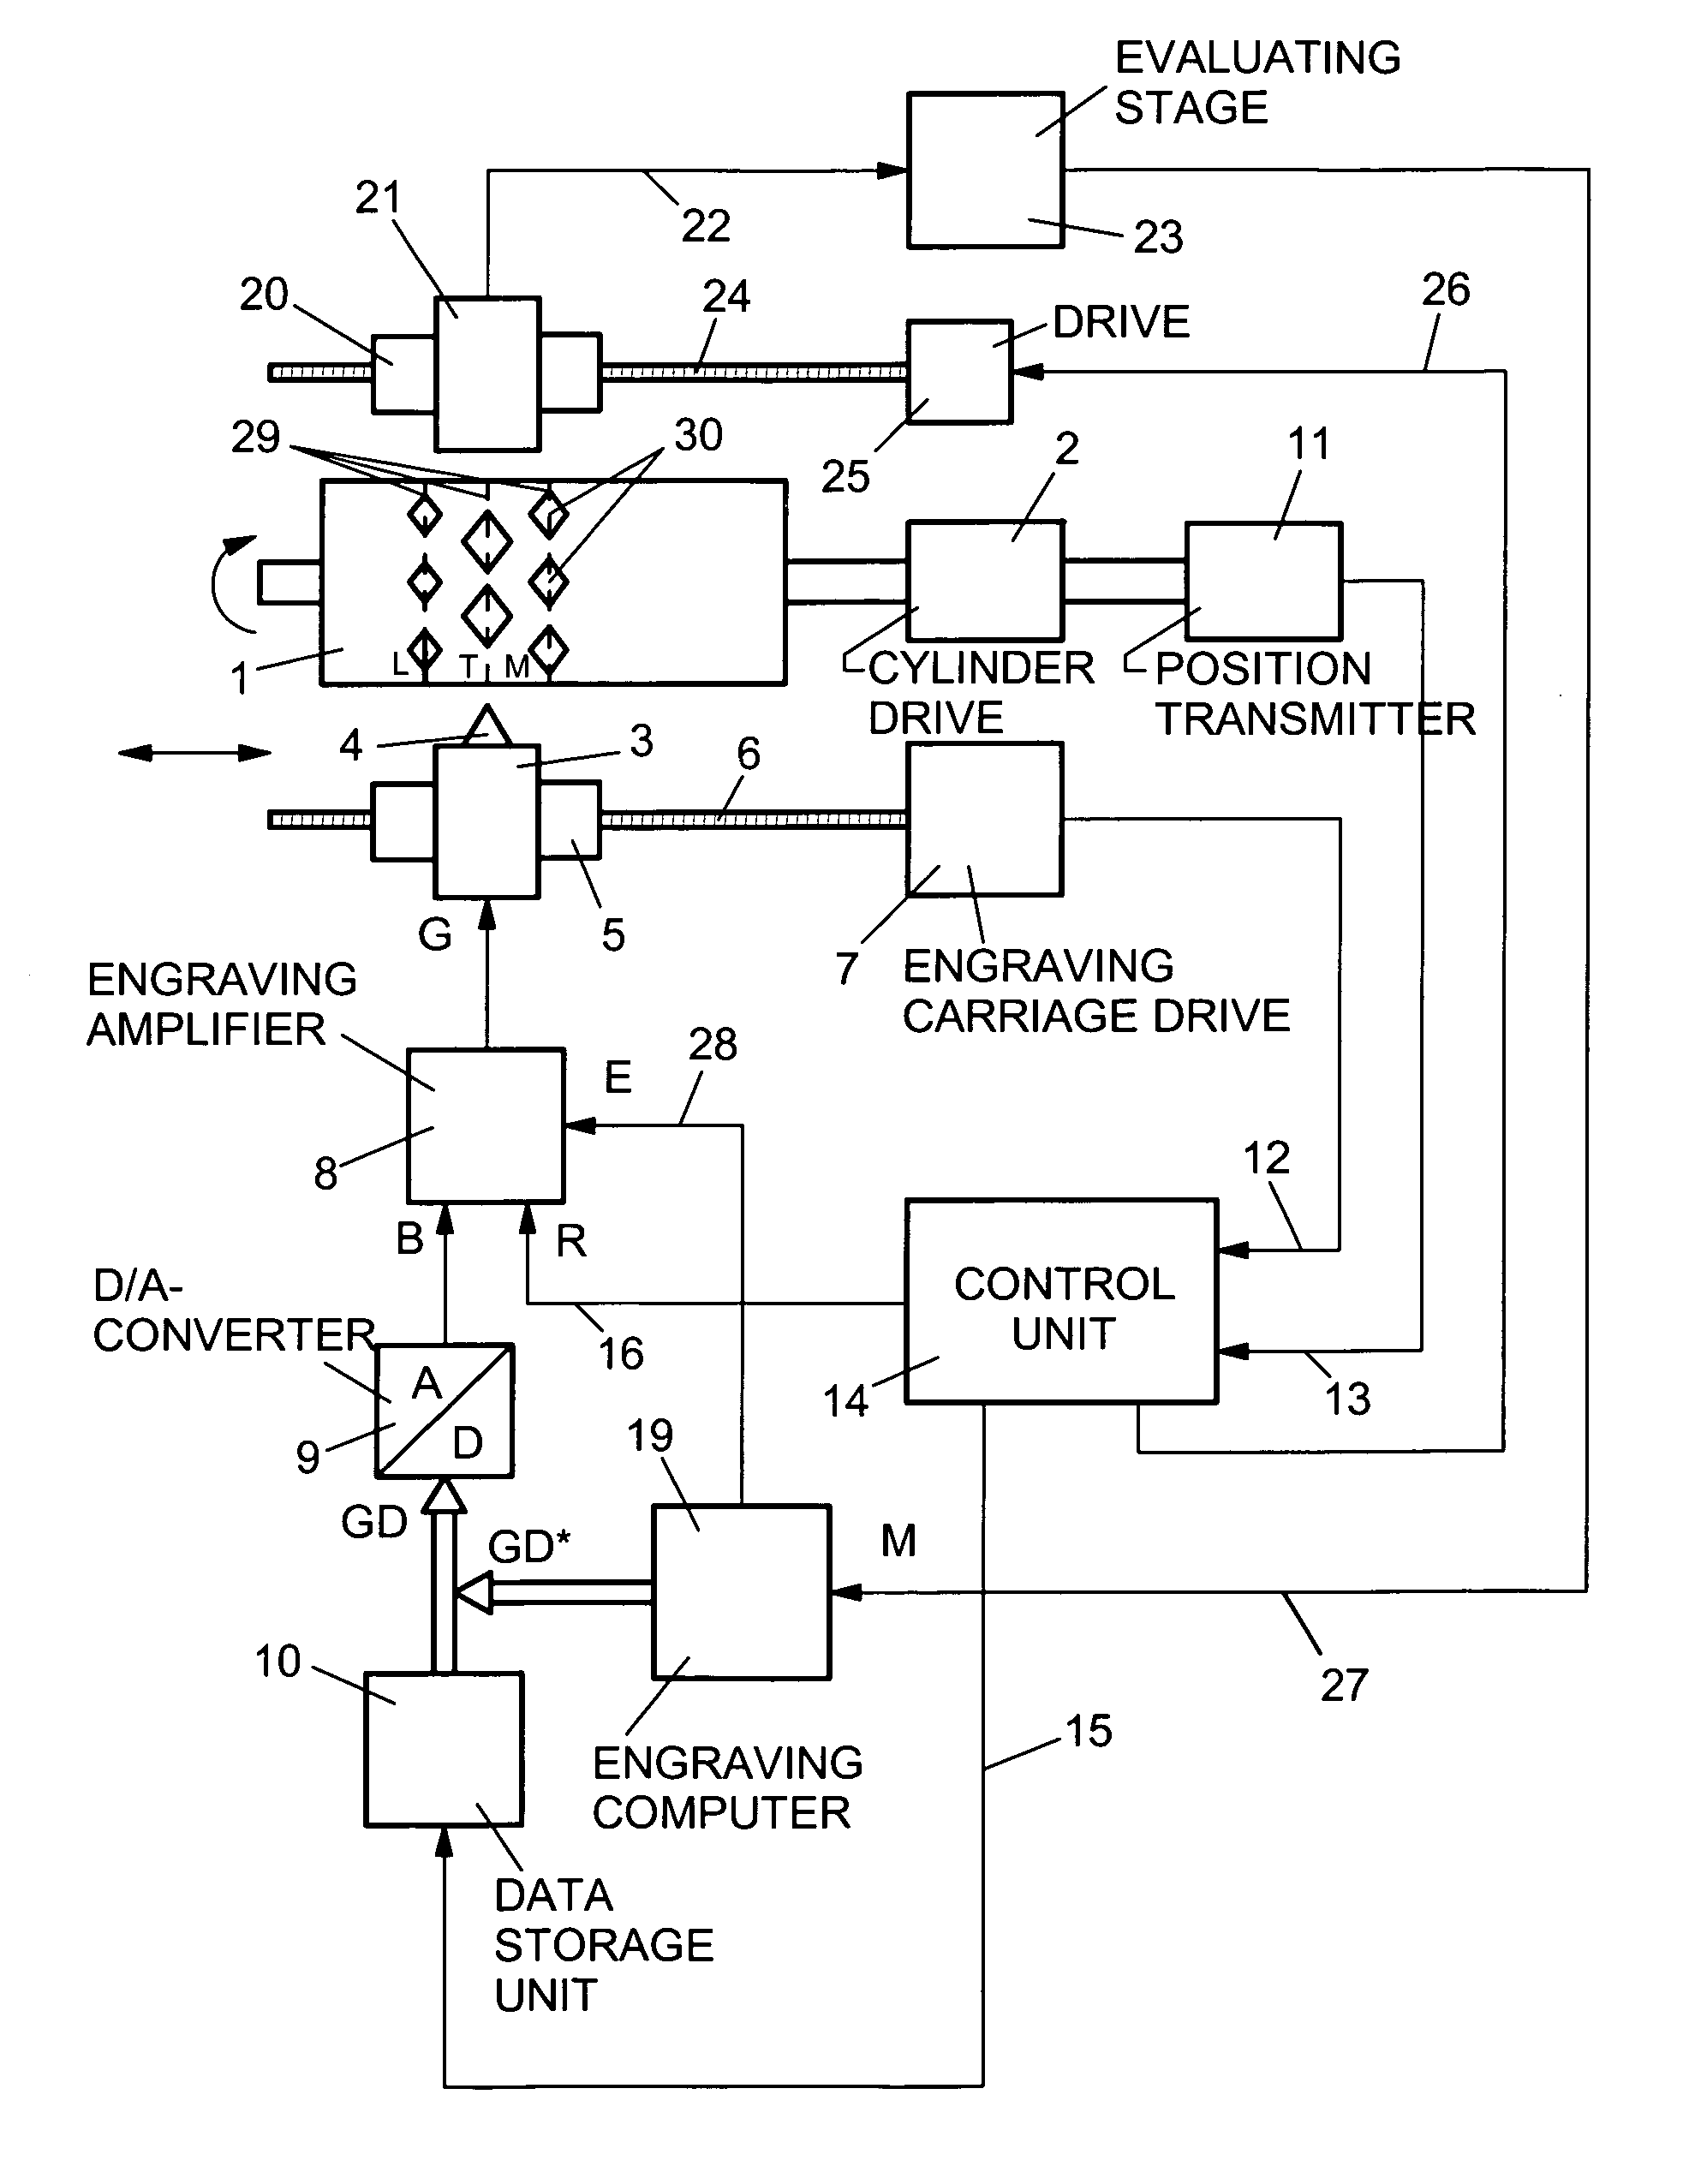 Method for calibrating an engraving amplifier